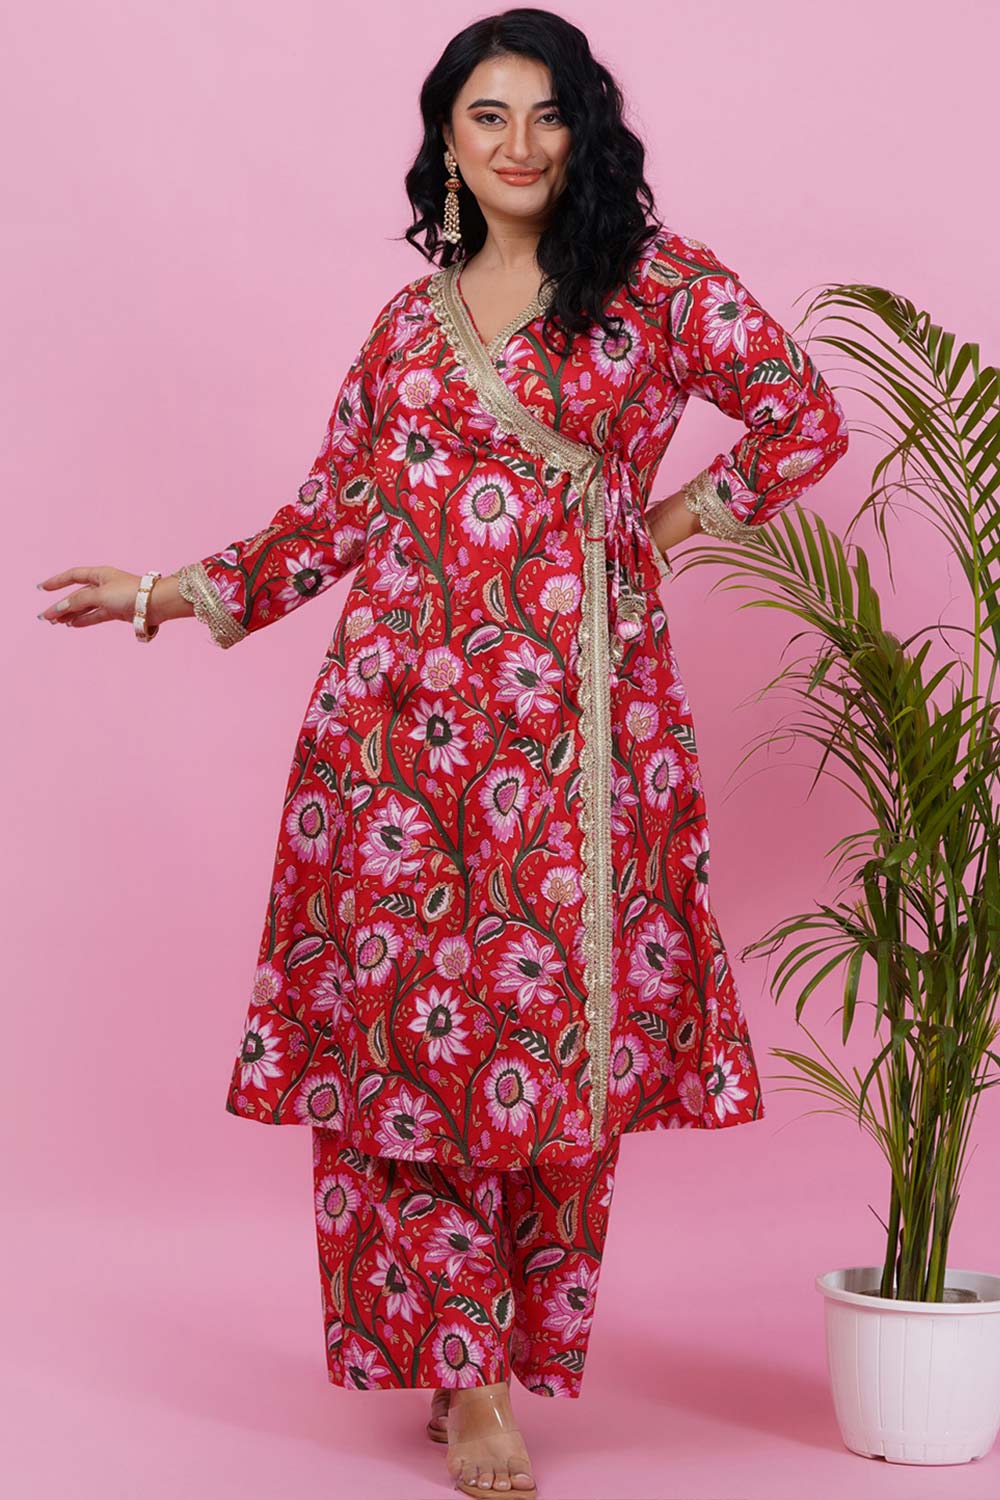 Shop for all Plus Size Clothing Online in India | LastInch